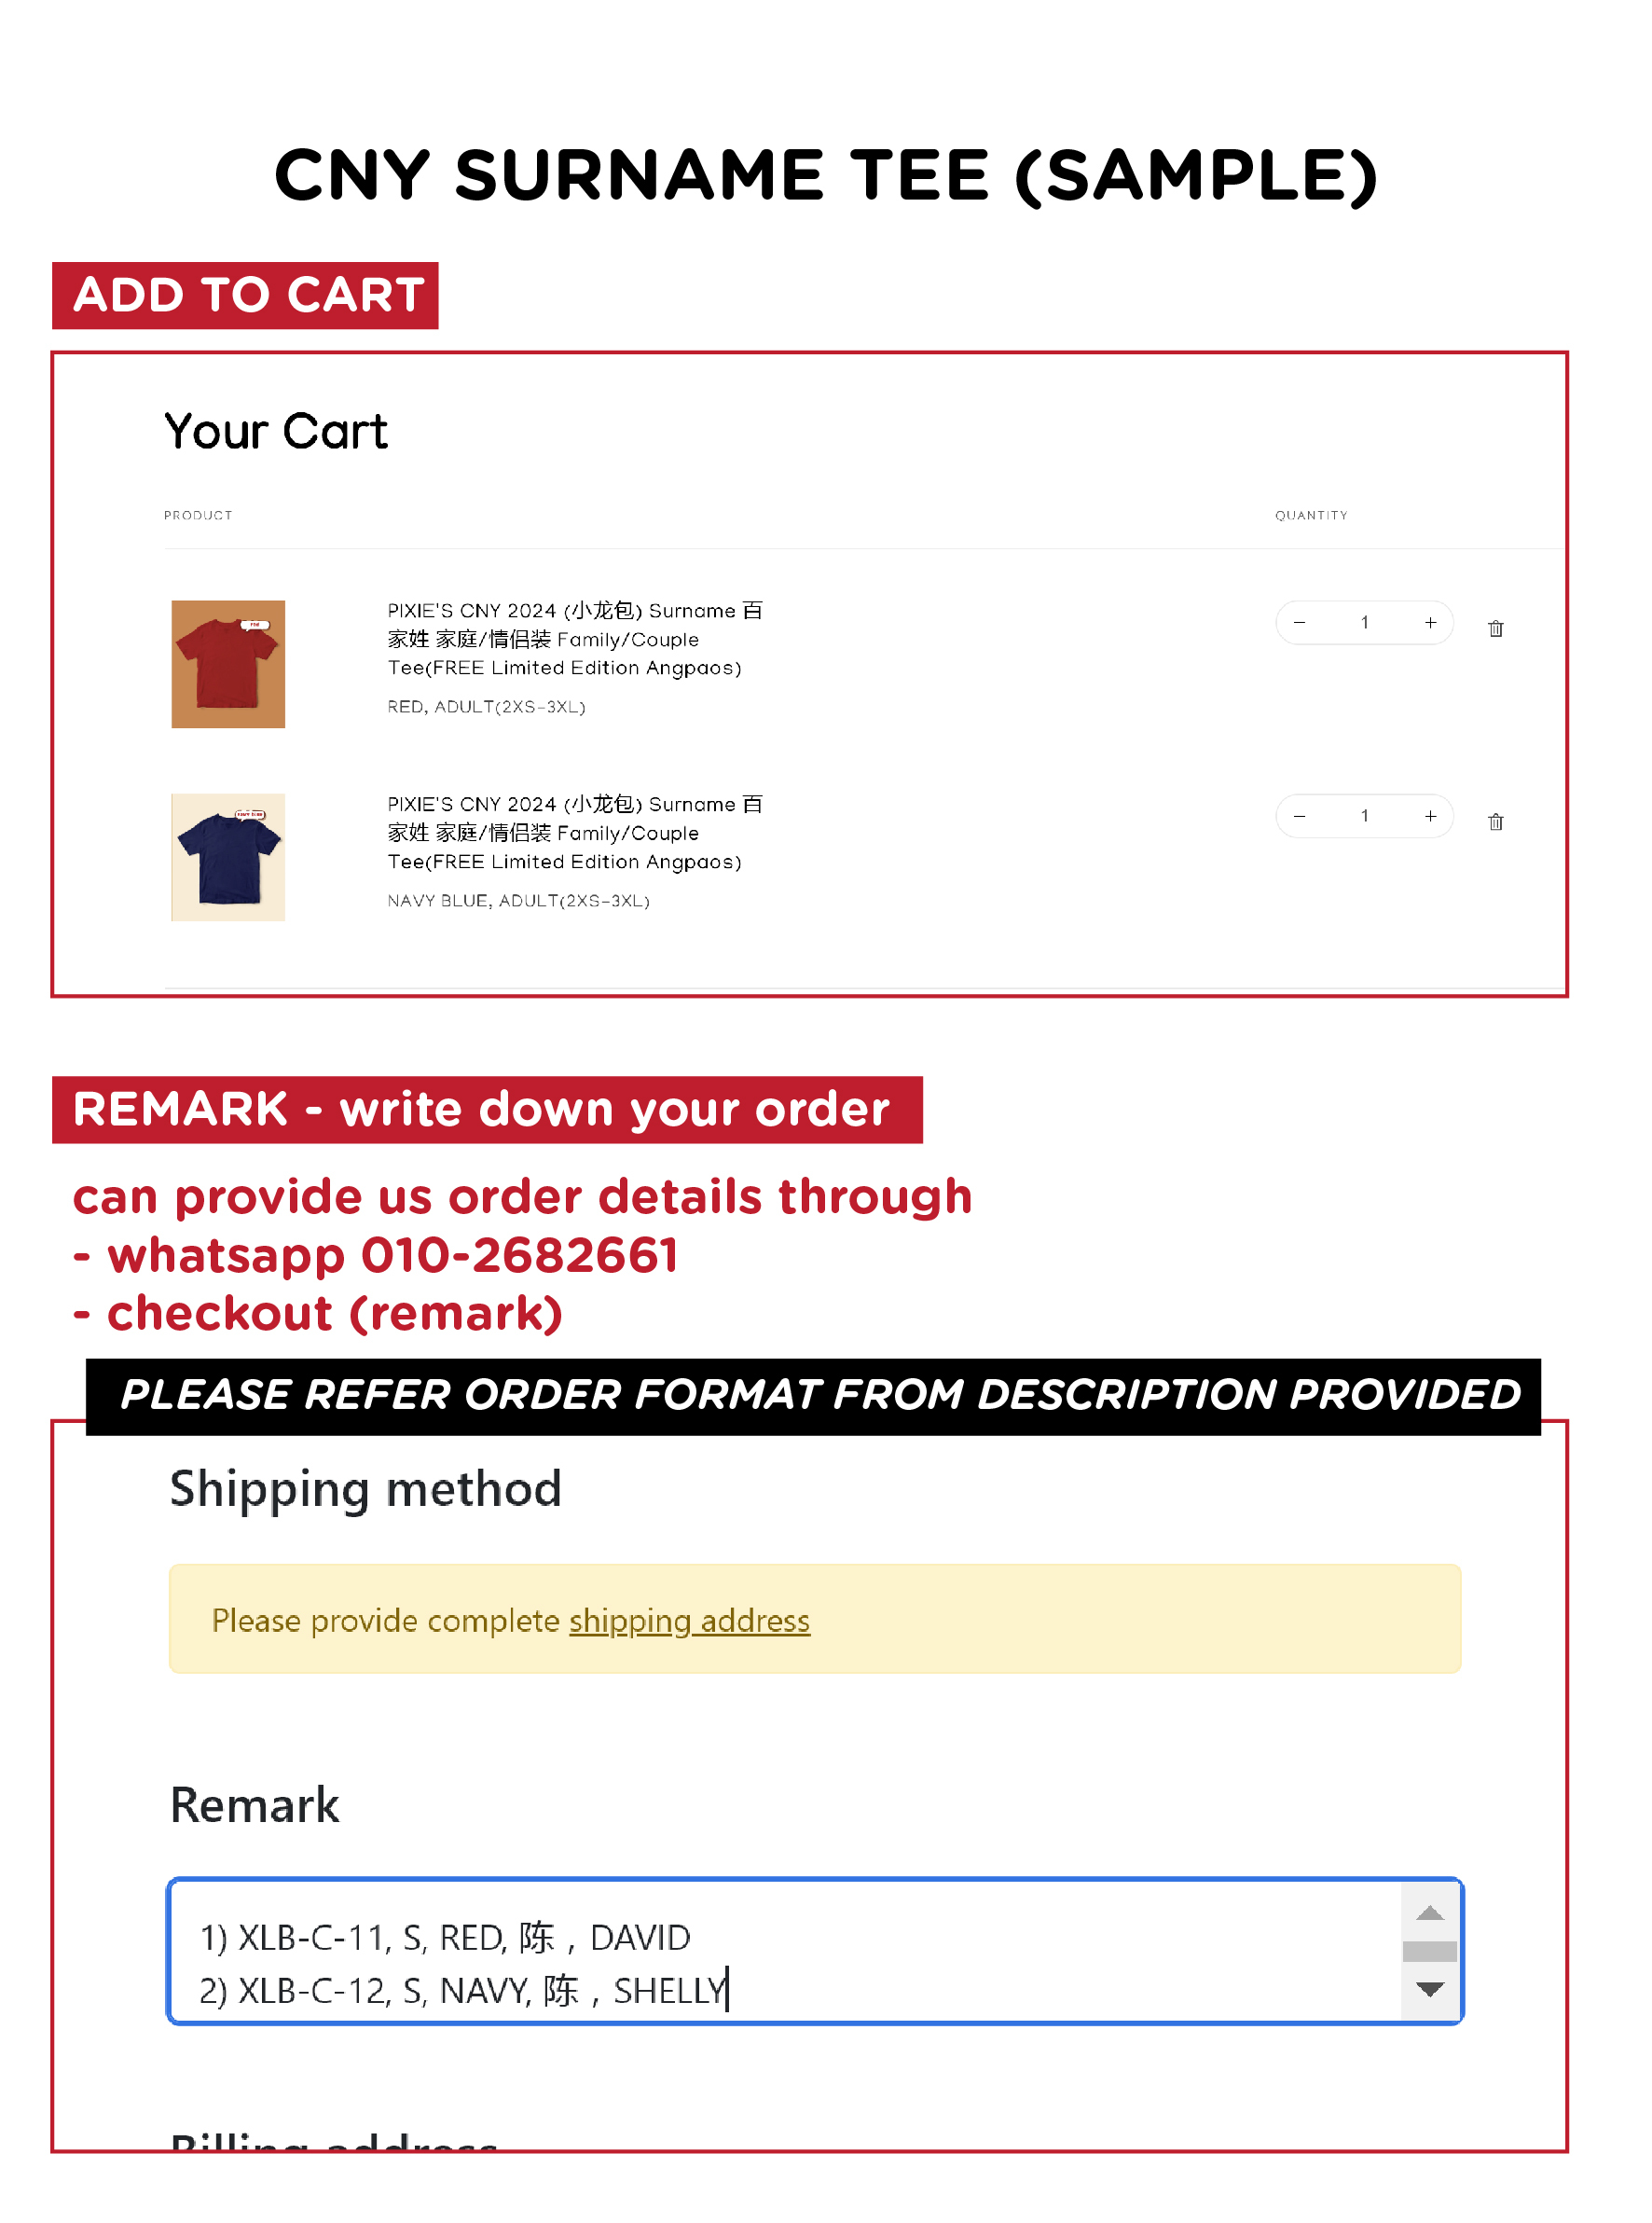 HOW TO PLACE ORDER-CNY SURNAME TEE